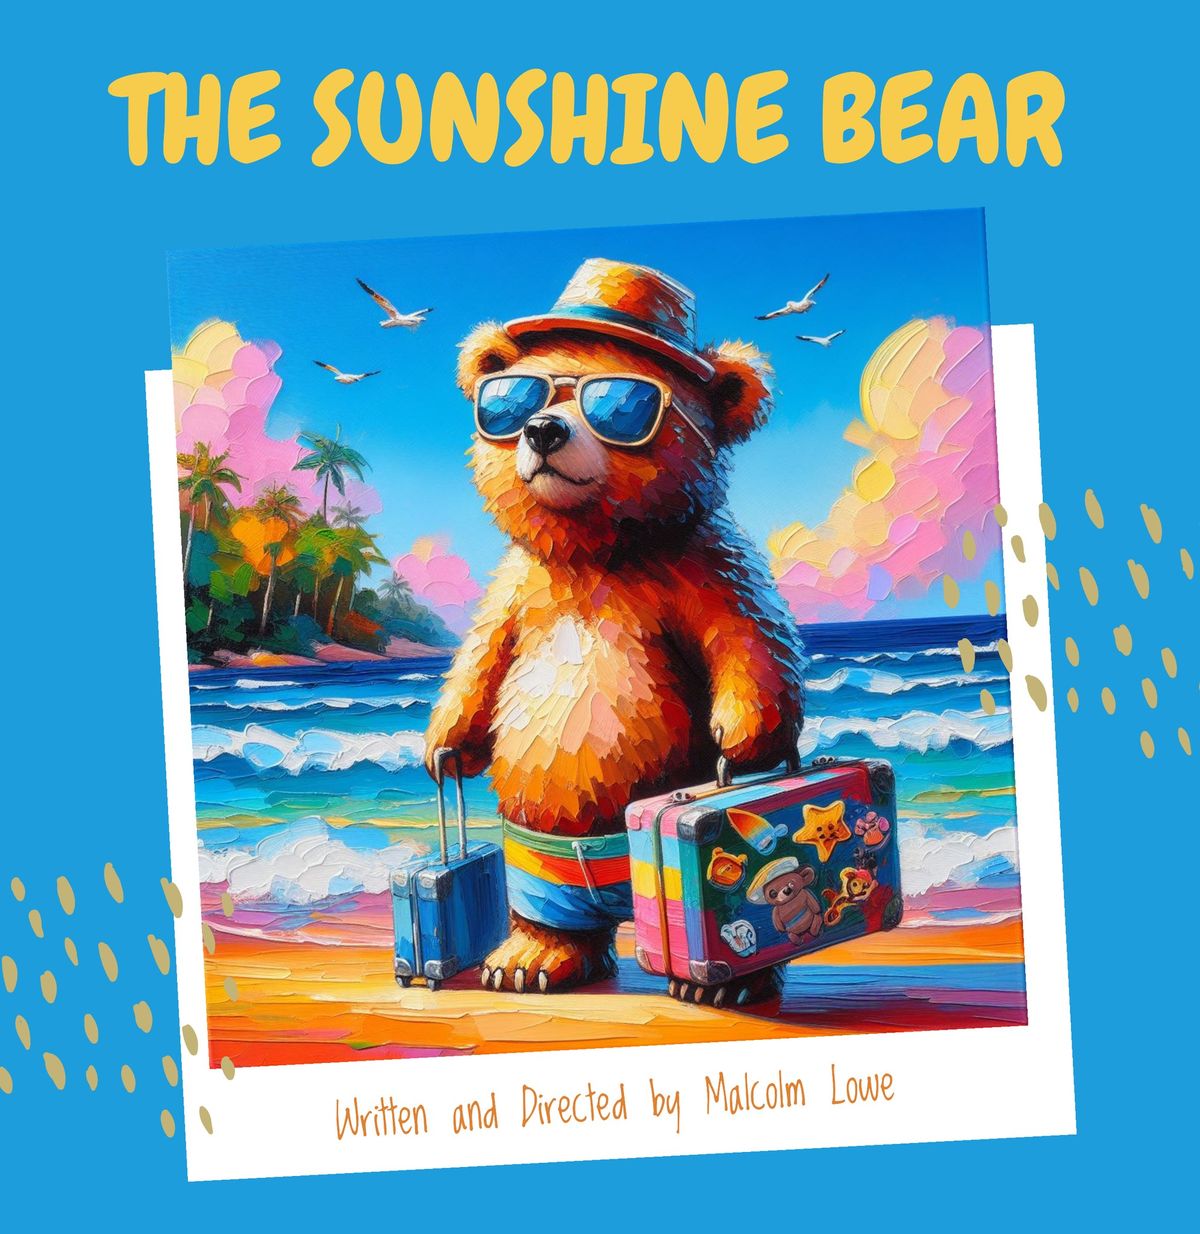 MPower Voices presents "The Sunshine Bear"